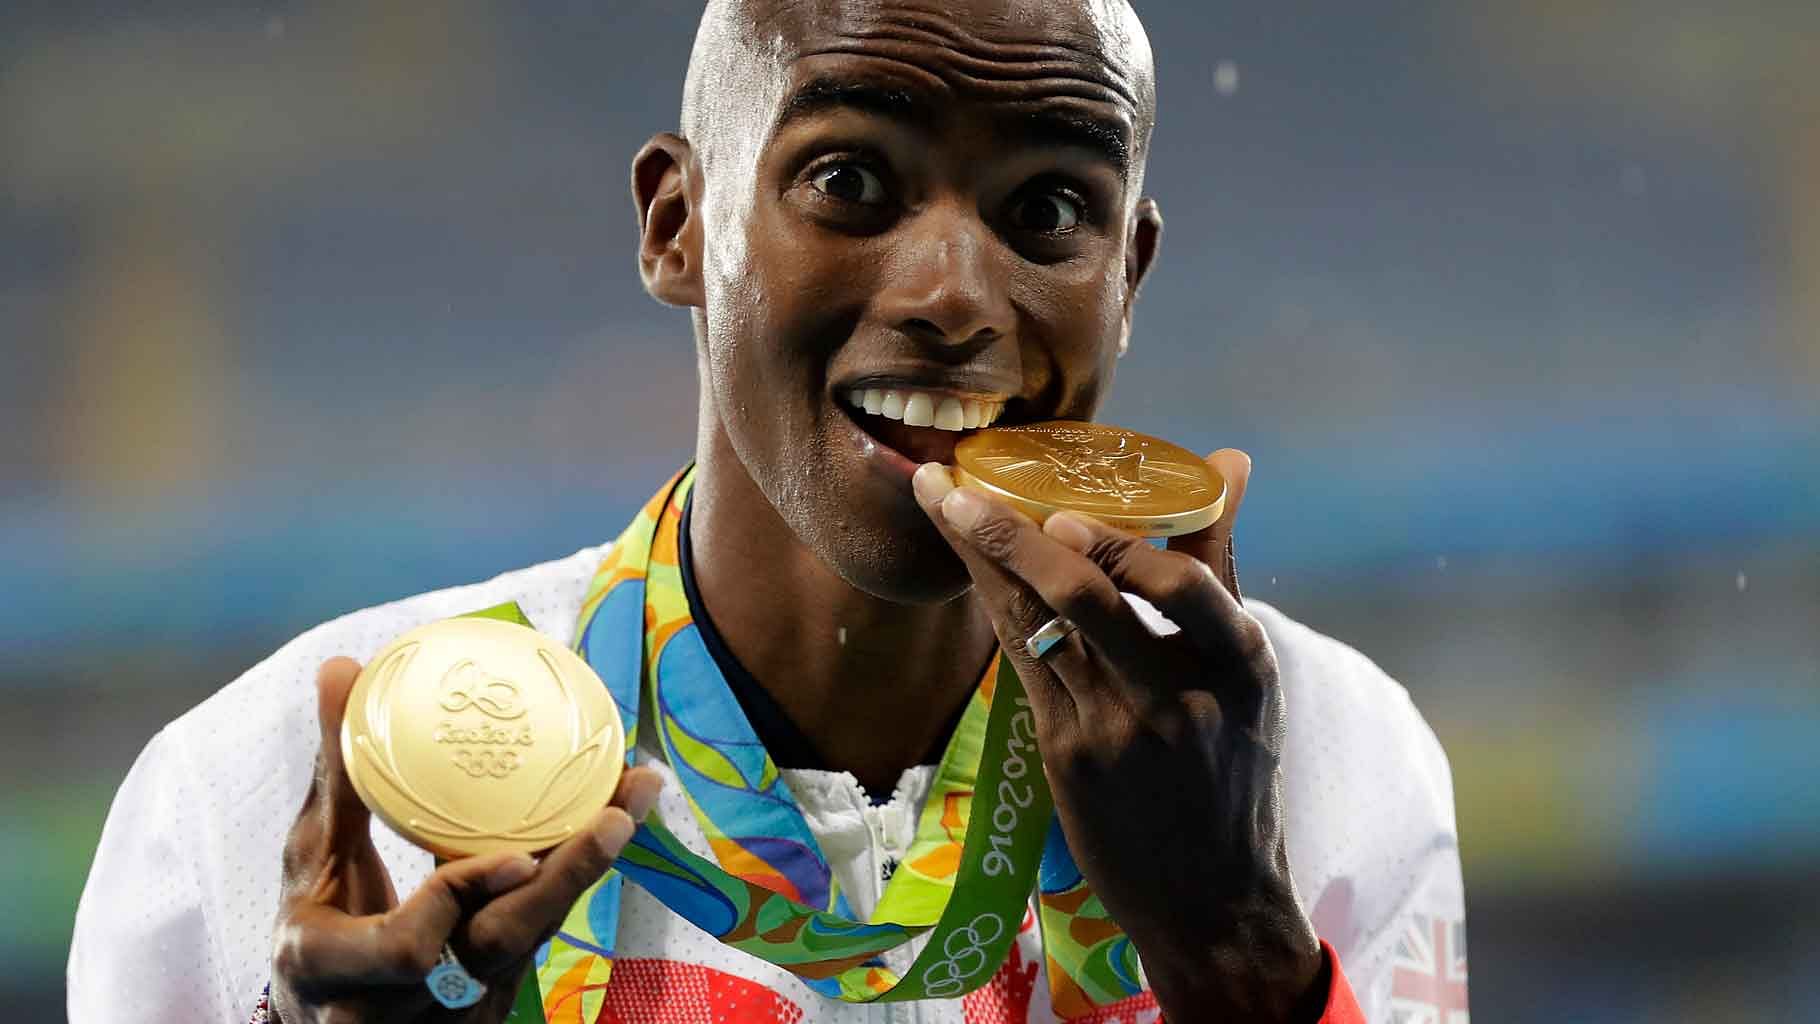  Britain’s Mo Farah celebrates winning the gold medal, men’s 5000-meter medals ceremony, during the athletics competitions of the 2016 Summer Olympics at the Olympic stadium in Rio de Janeiro, Brazil. (Photo: AP)